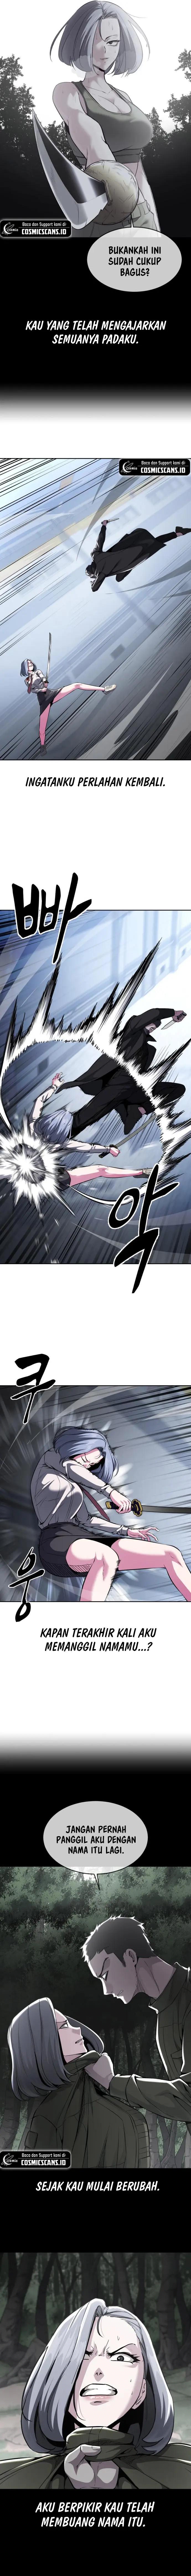 The Boy Of Death Chapter 179 - 207